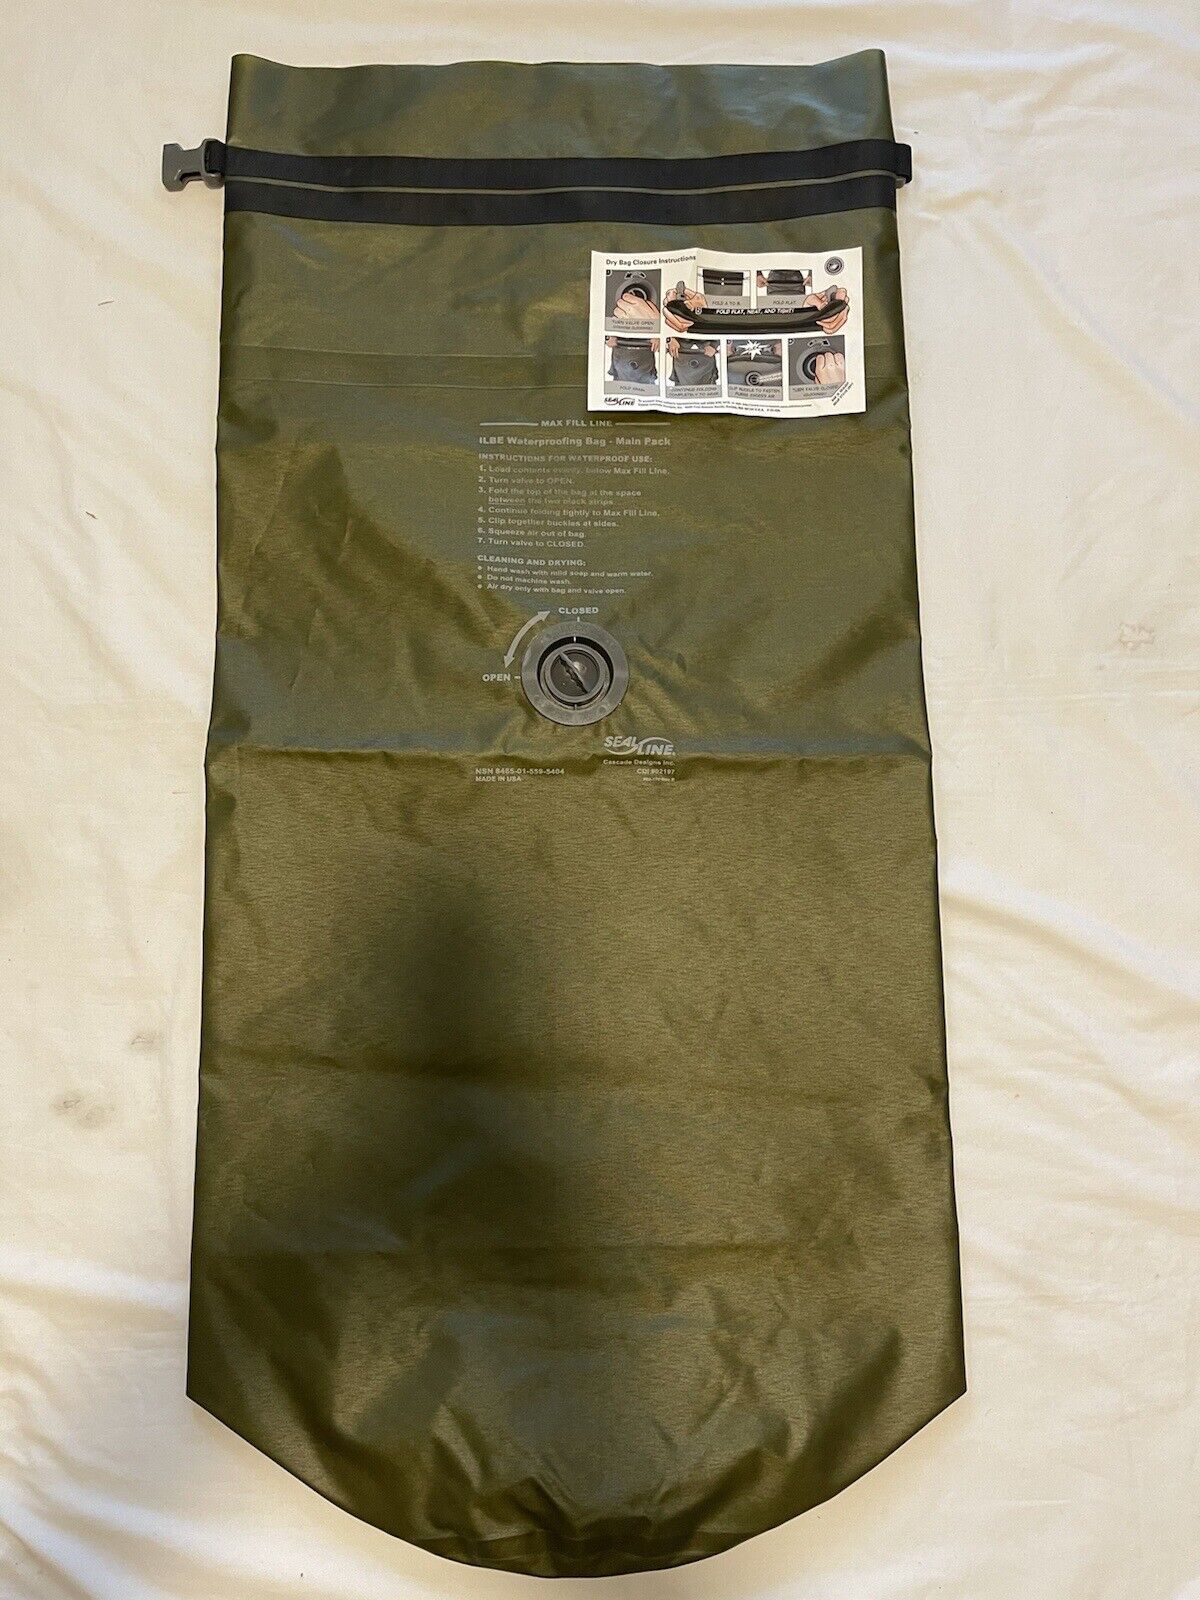 USMC SEAL LINE WATERPROOF 65L DRY BAG LIGHT WEIGHT BACK PACKING,CAMPING HUNTING